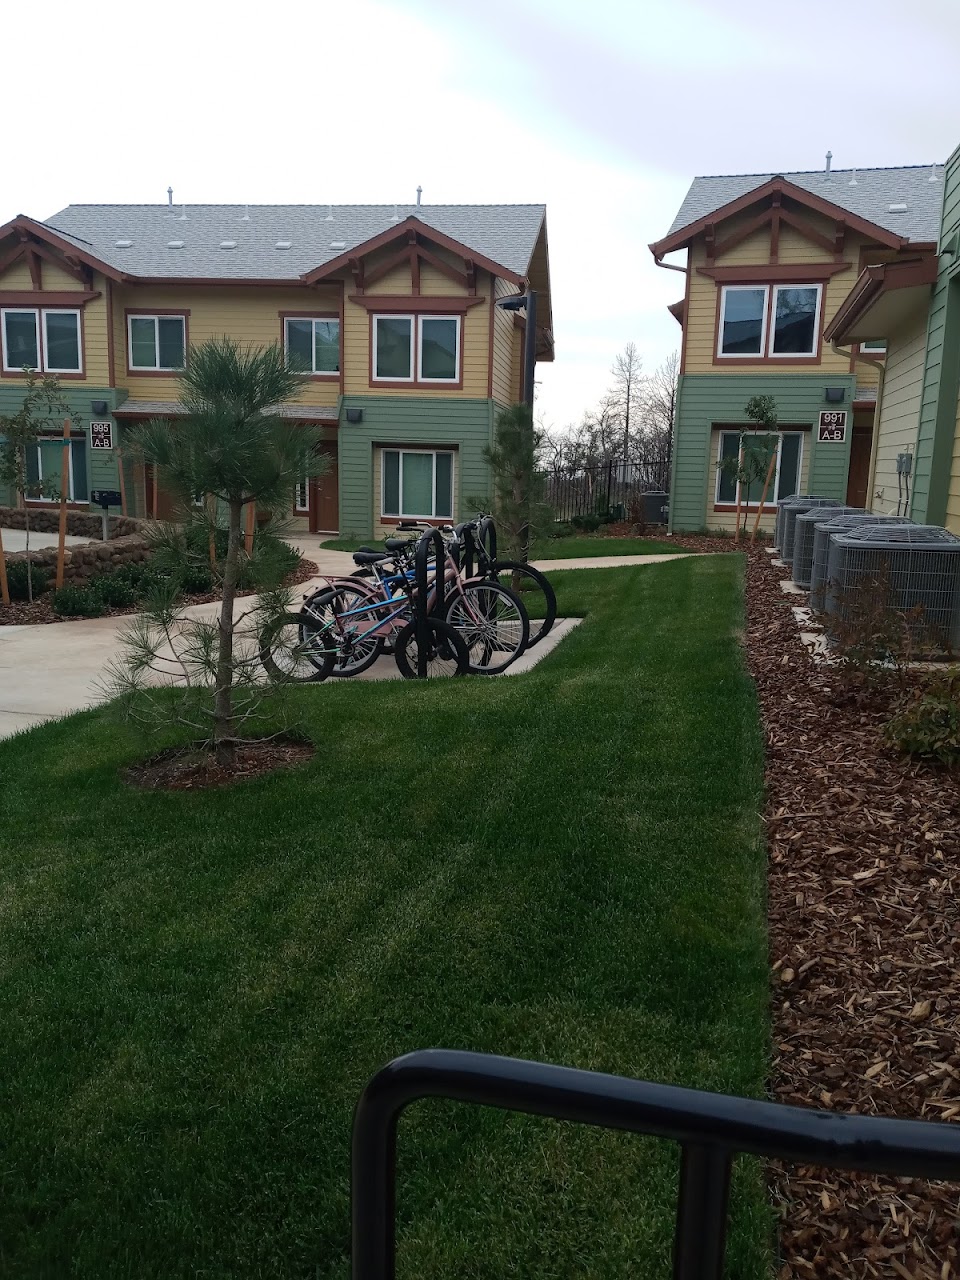 Photo of PARADISE COMMUNITY VILLAGE. Affordable housing located at 1001 VILLAGE PKWY PARADISE, CA 95969